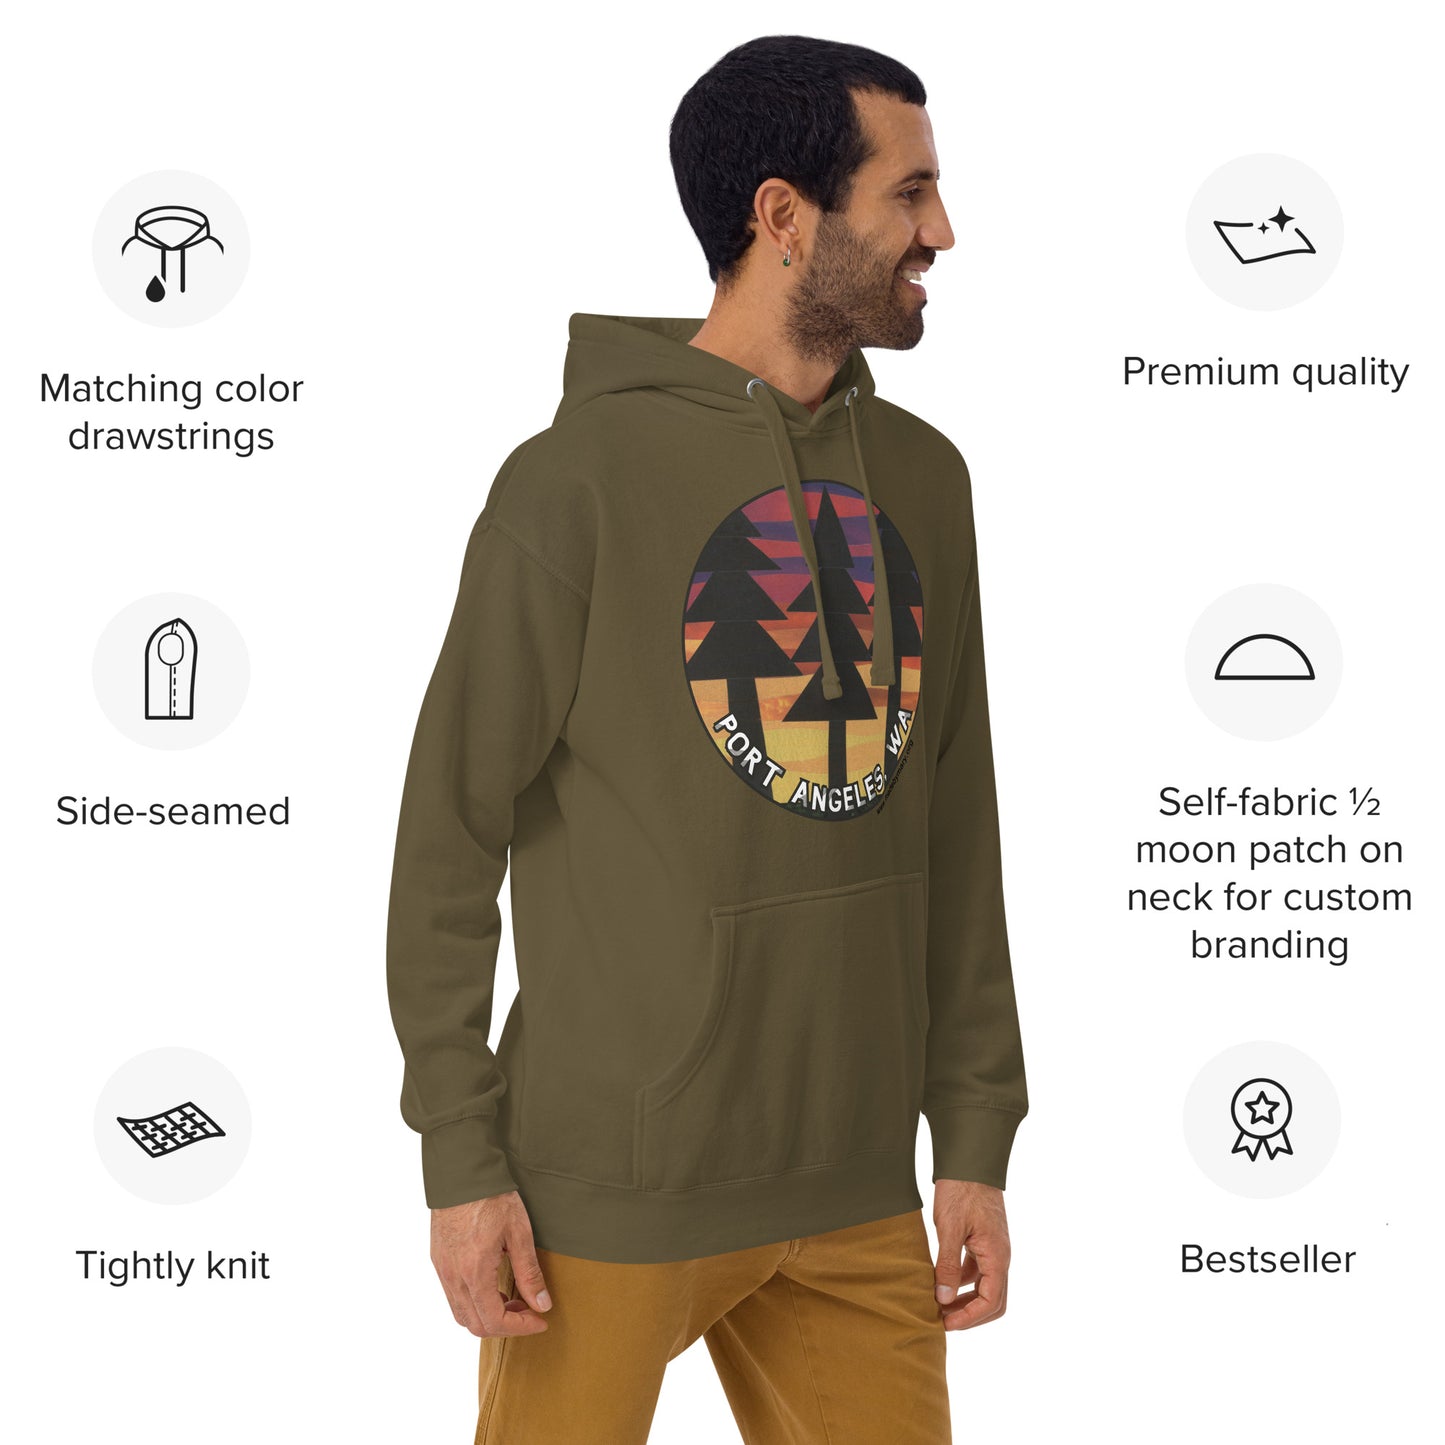 Evergreens in the Sunset in Port Angeles Unisex Hoodie